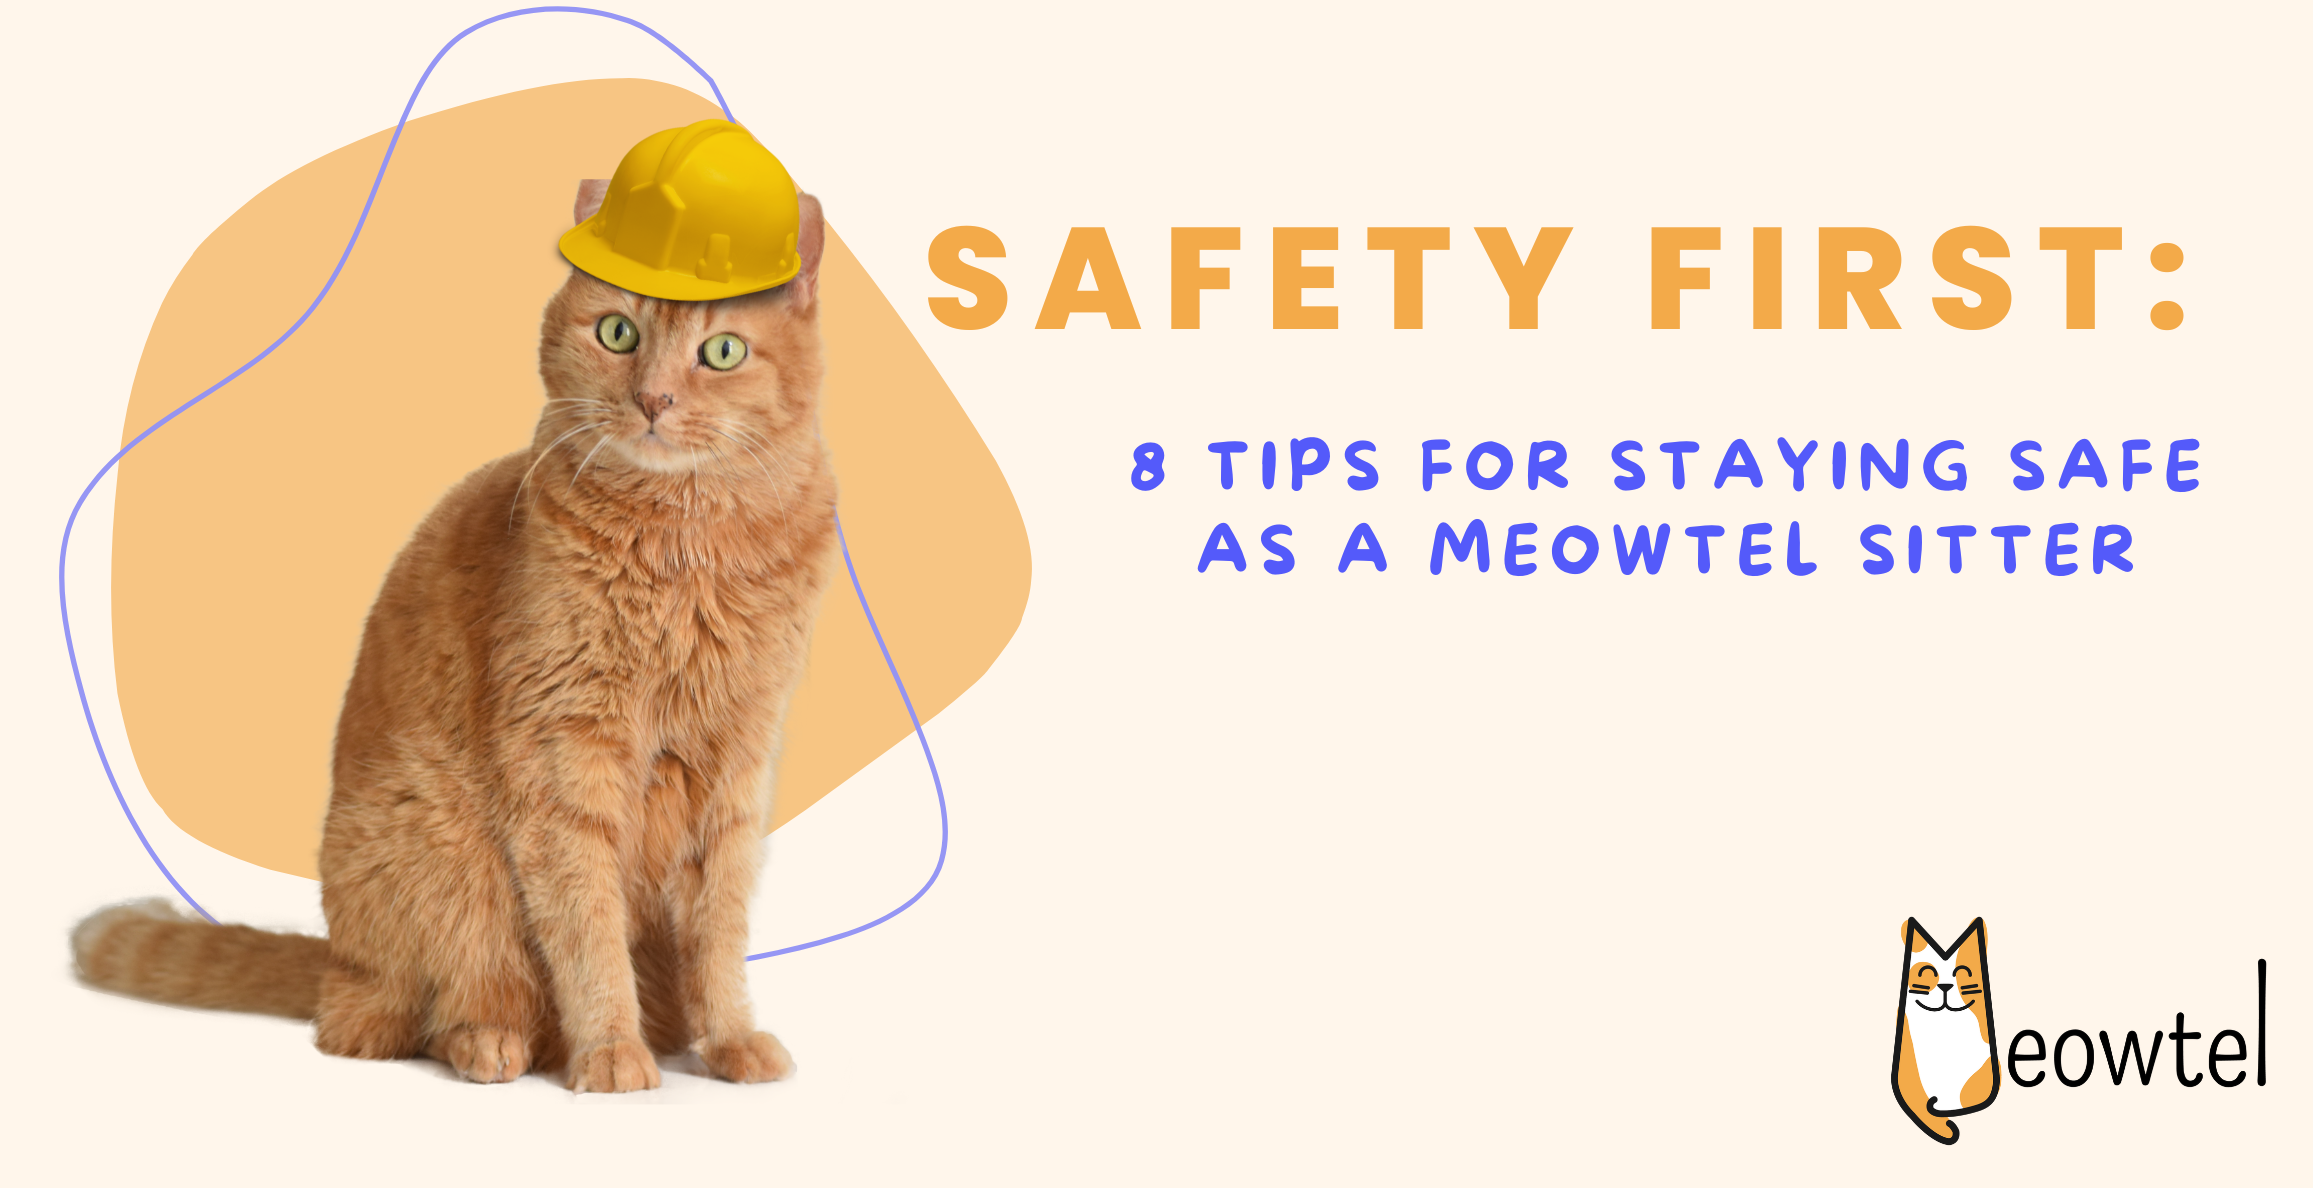 Safety First: 8 Tips for Staying Safe as a Meowtel Sitter